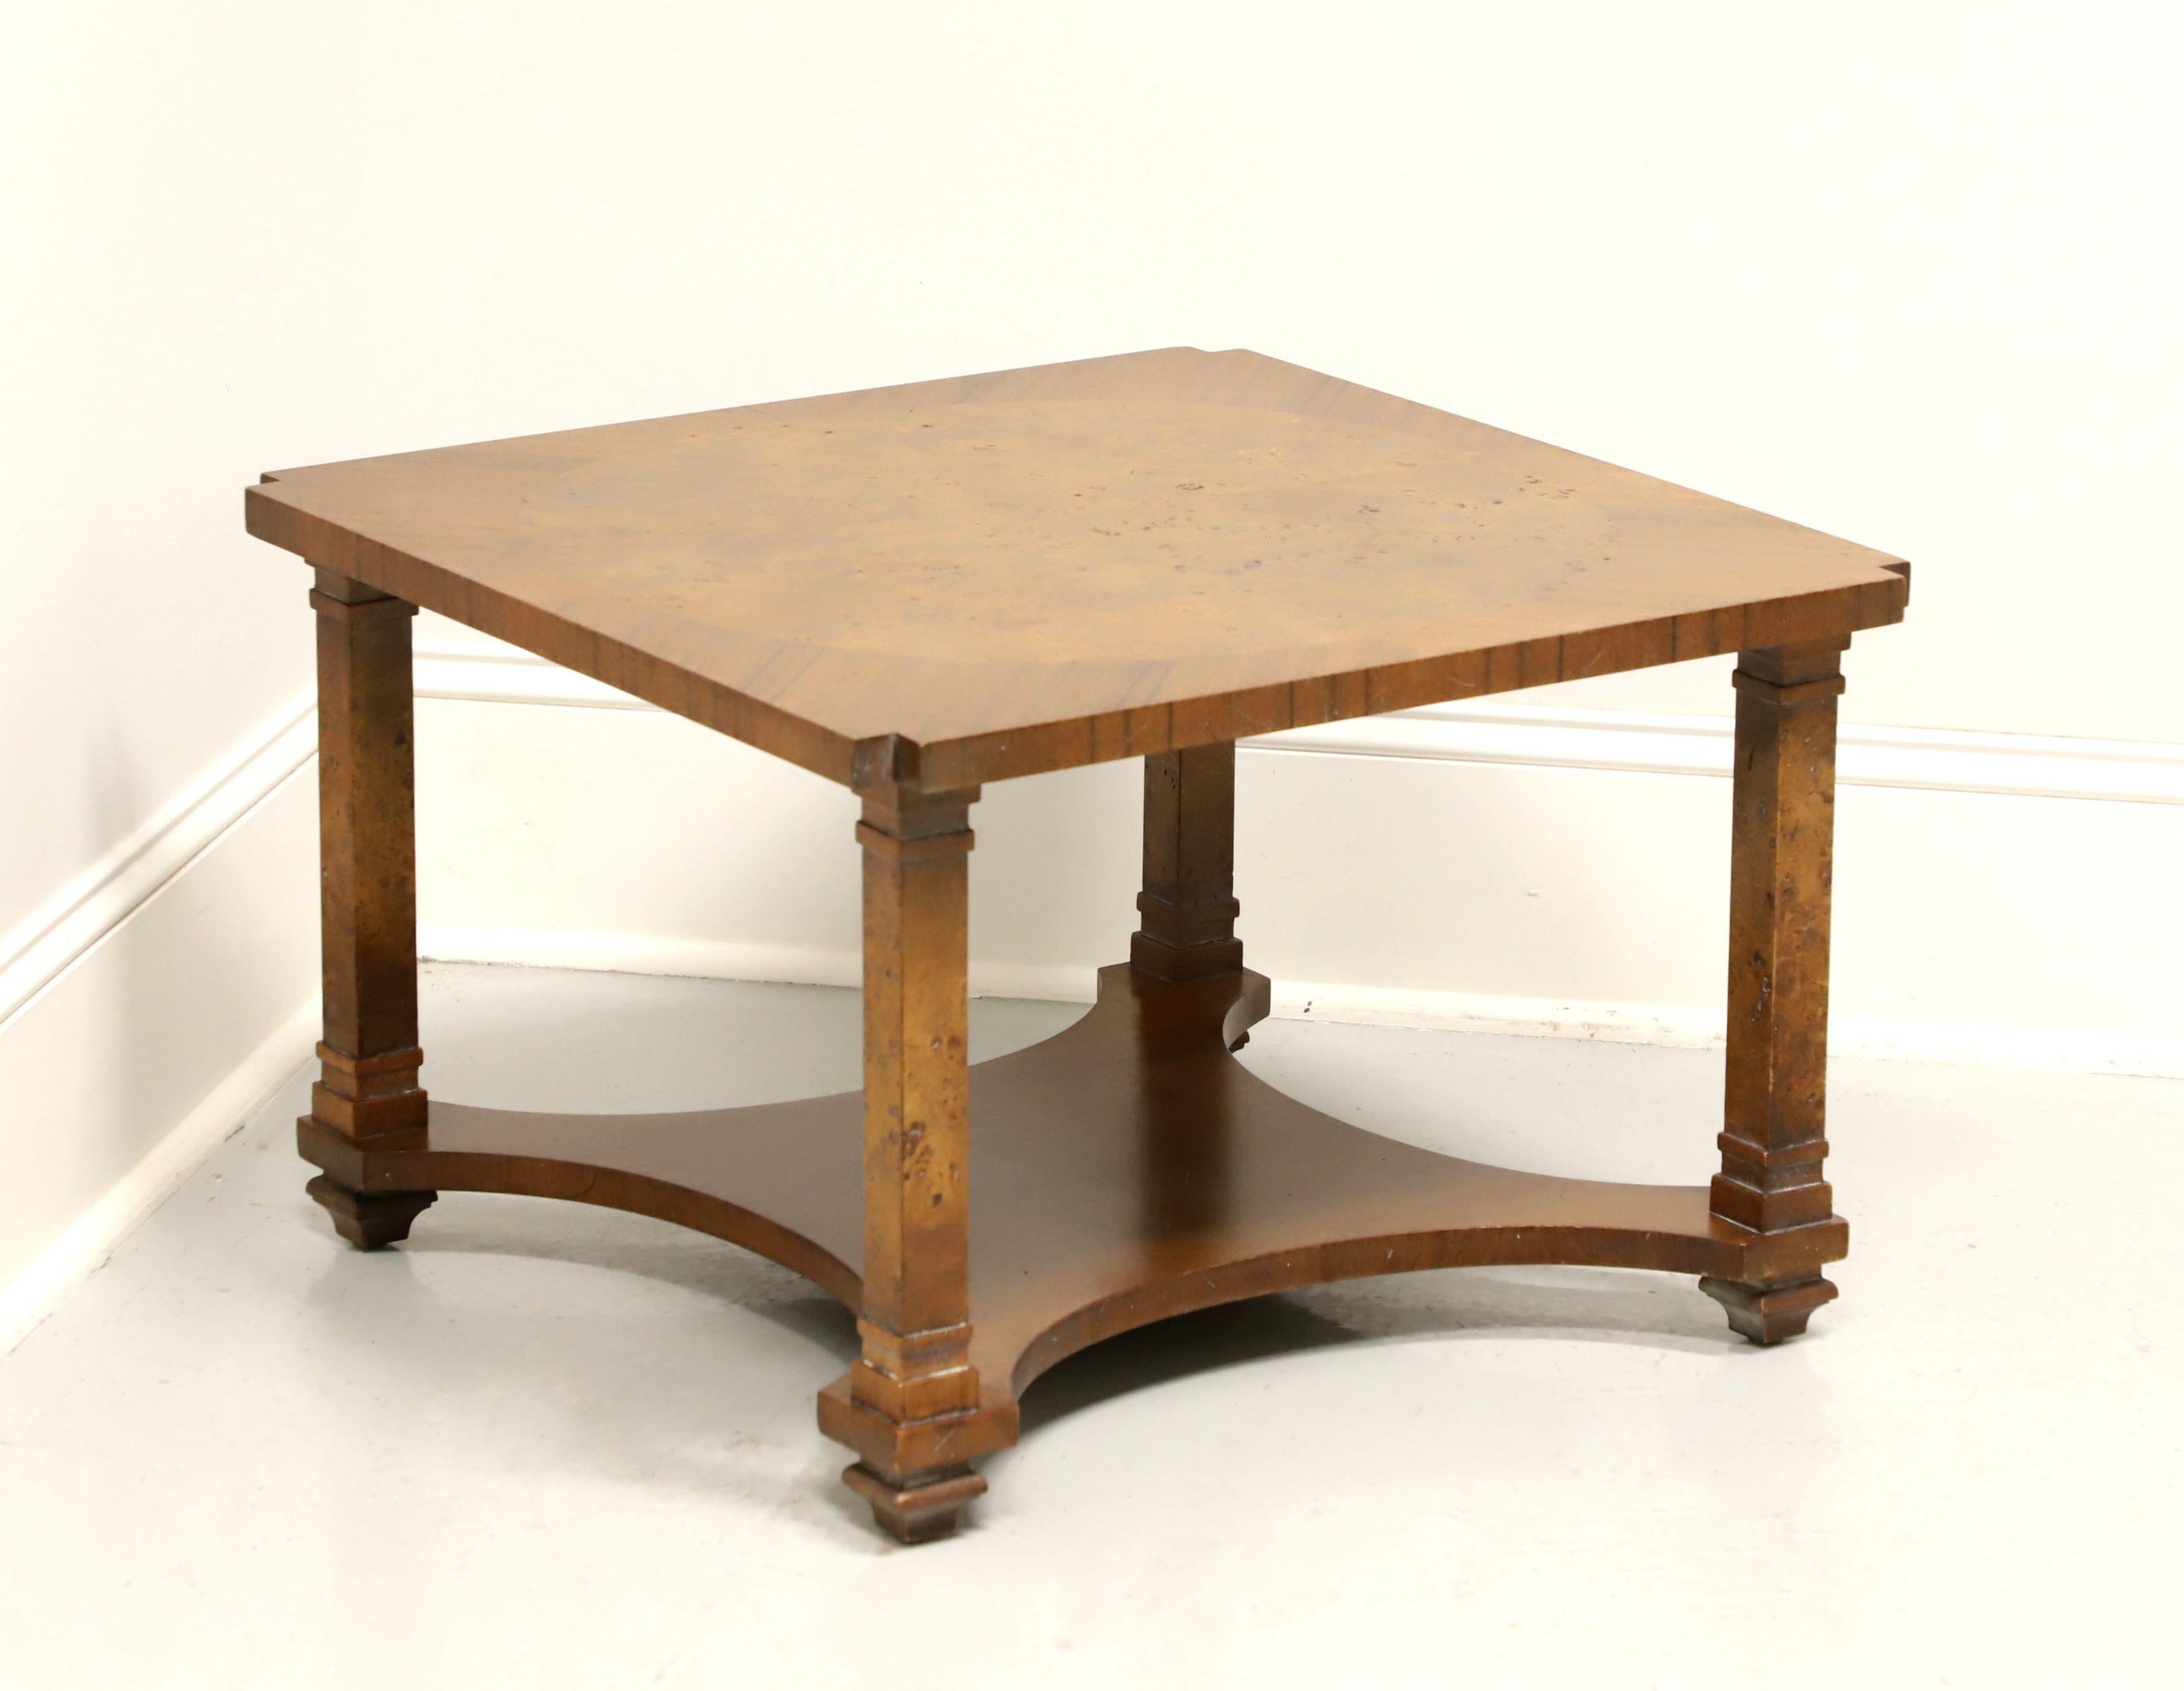 TOMLINSON 1960's Walnut Neoclassical Square Cocktail Table with Undertier Shelf 3